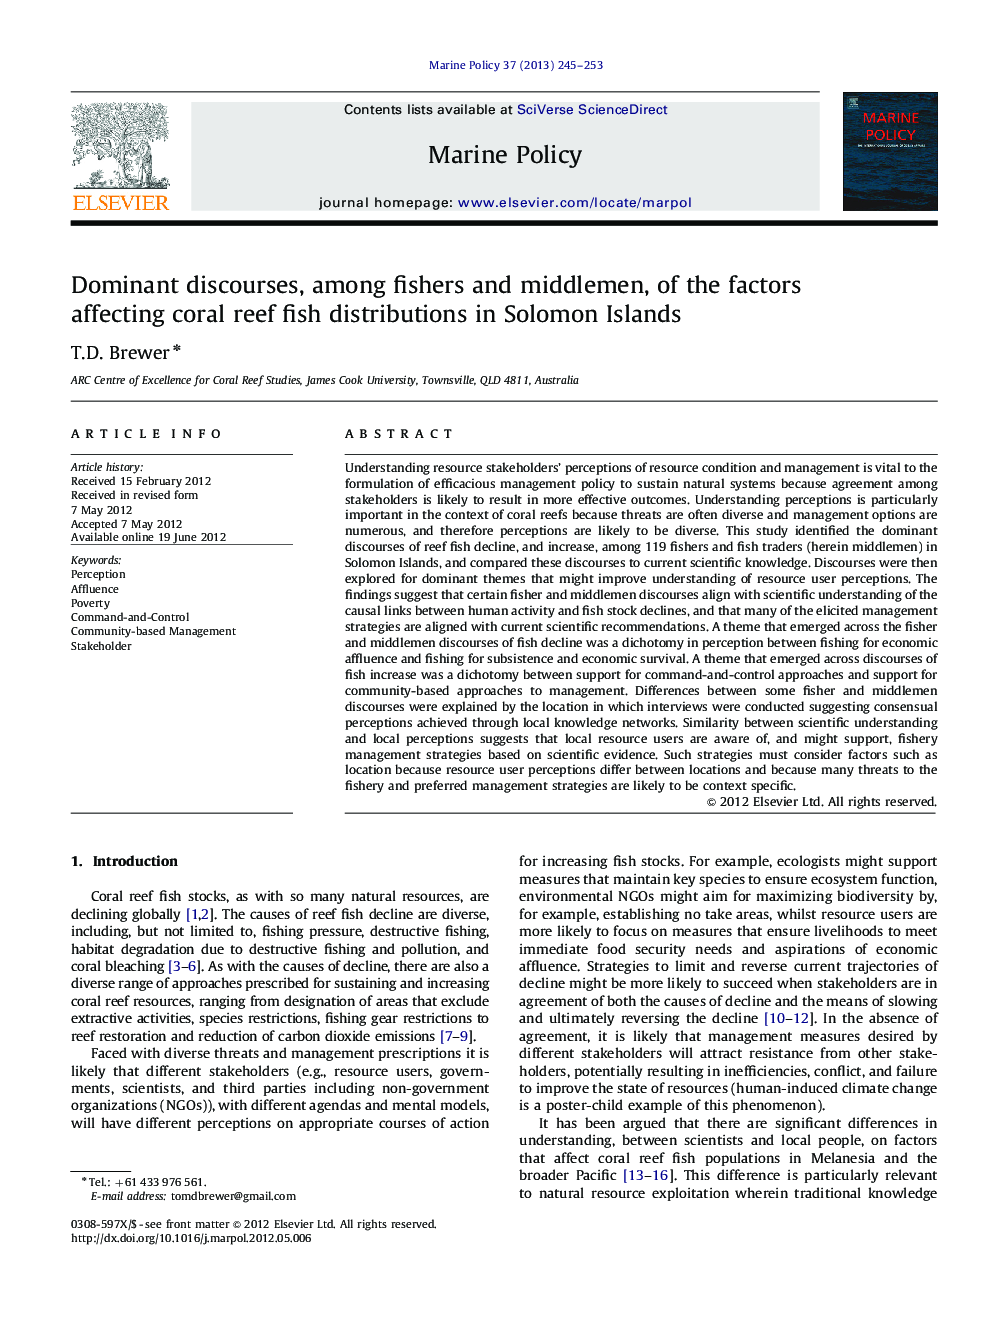 Dominant discourses, among fishers and middlemen, of the factors affecting coral reef fish distributions in Solomon Islands